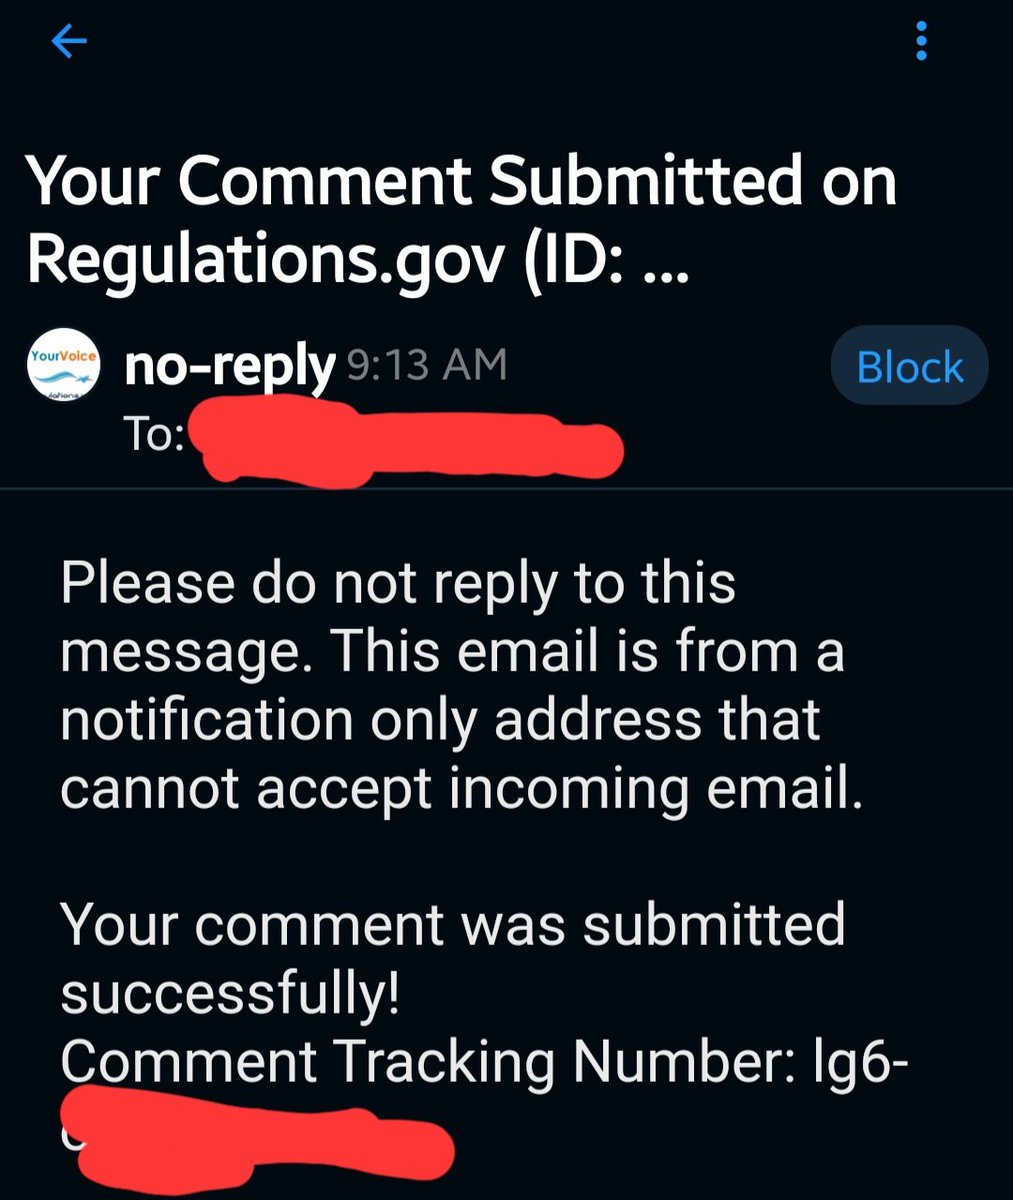 Got my sis to submit a comment, which she submitted this morning. #ClaimTheName #ADOS 🙌🏽